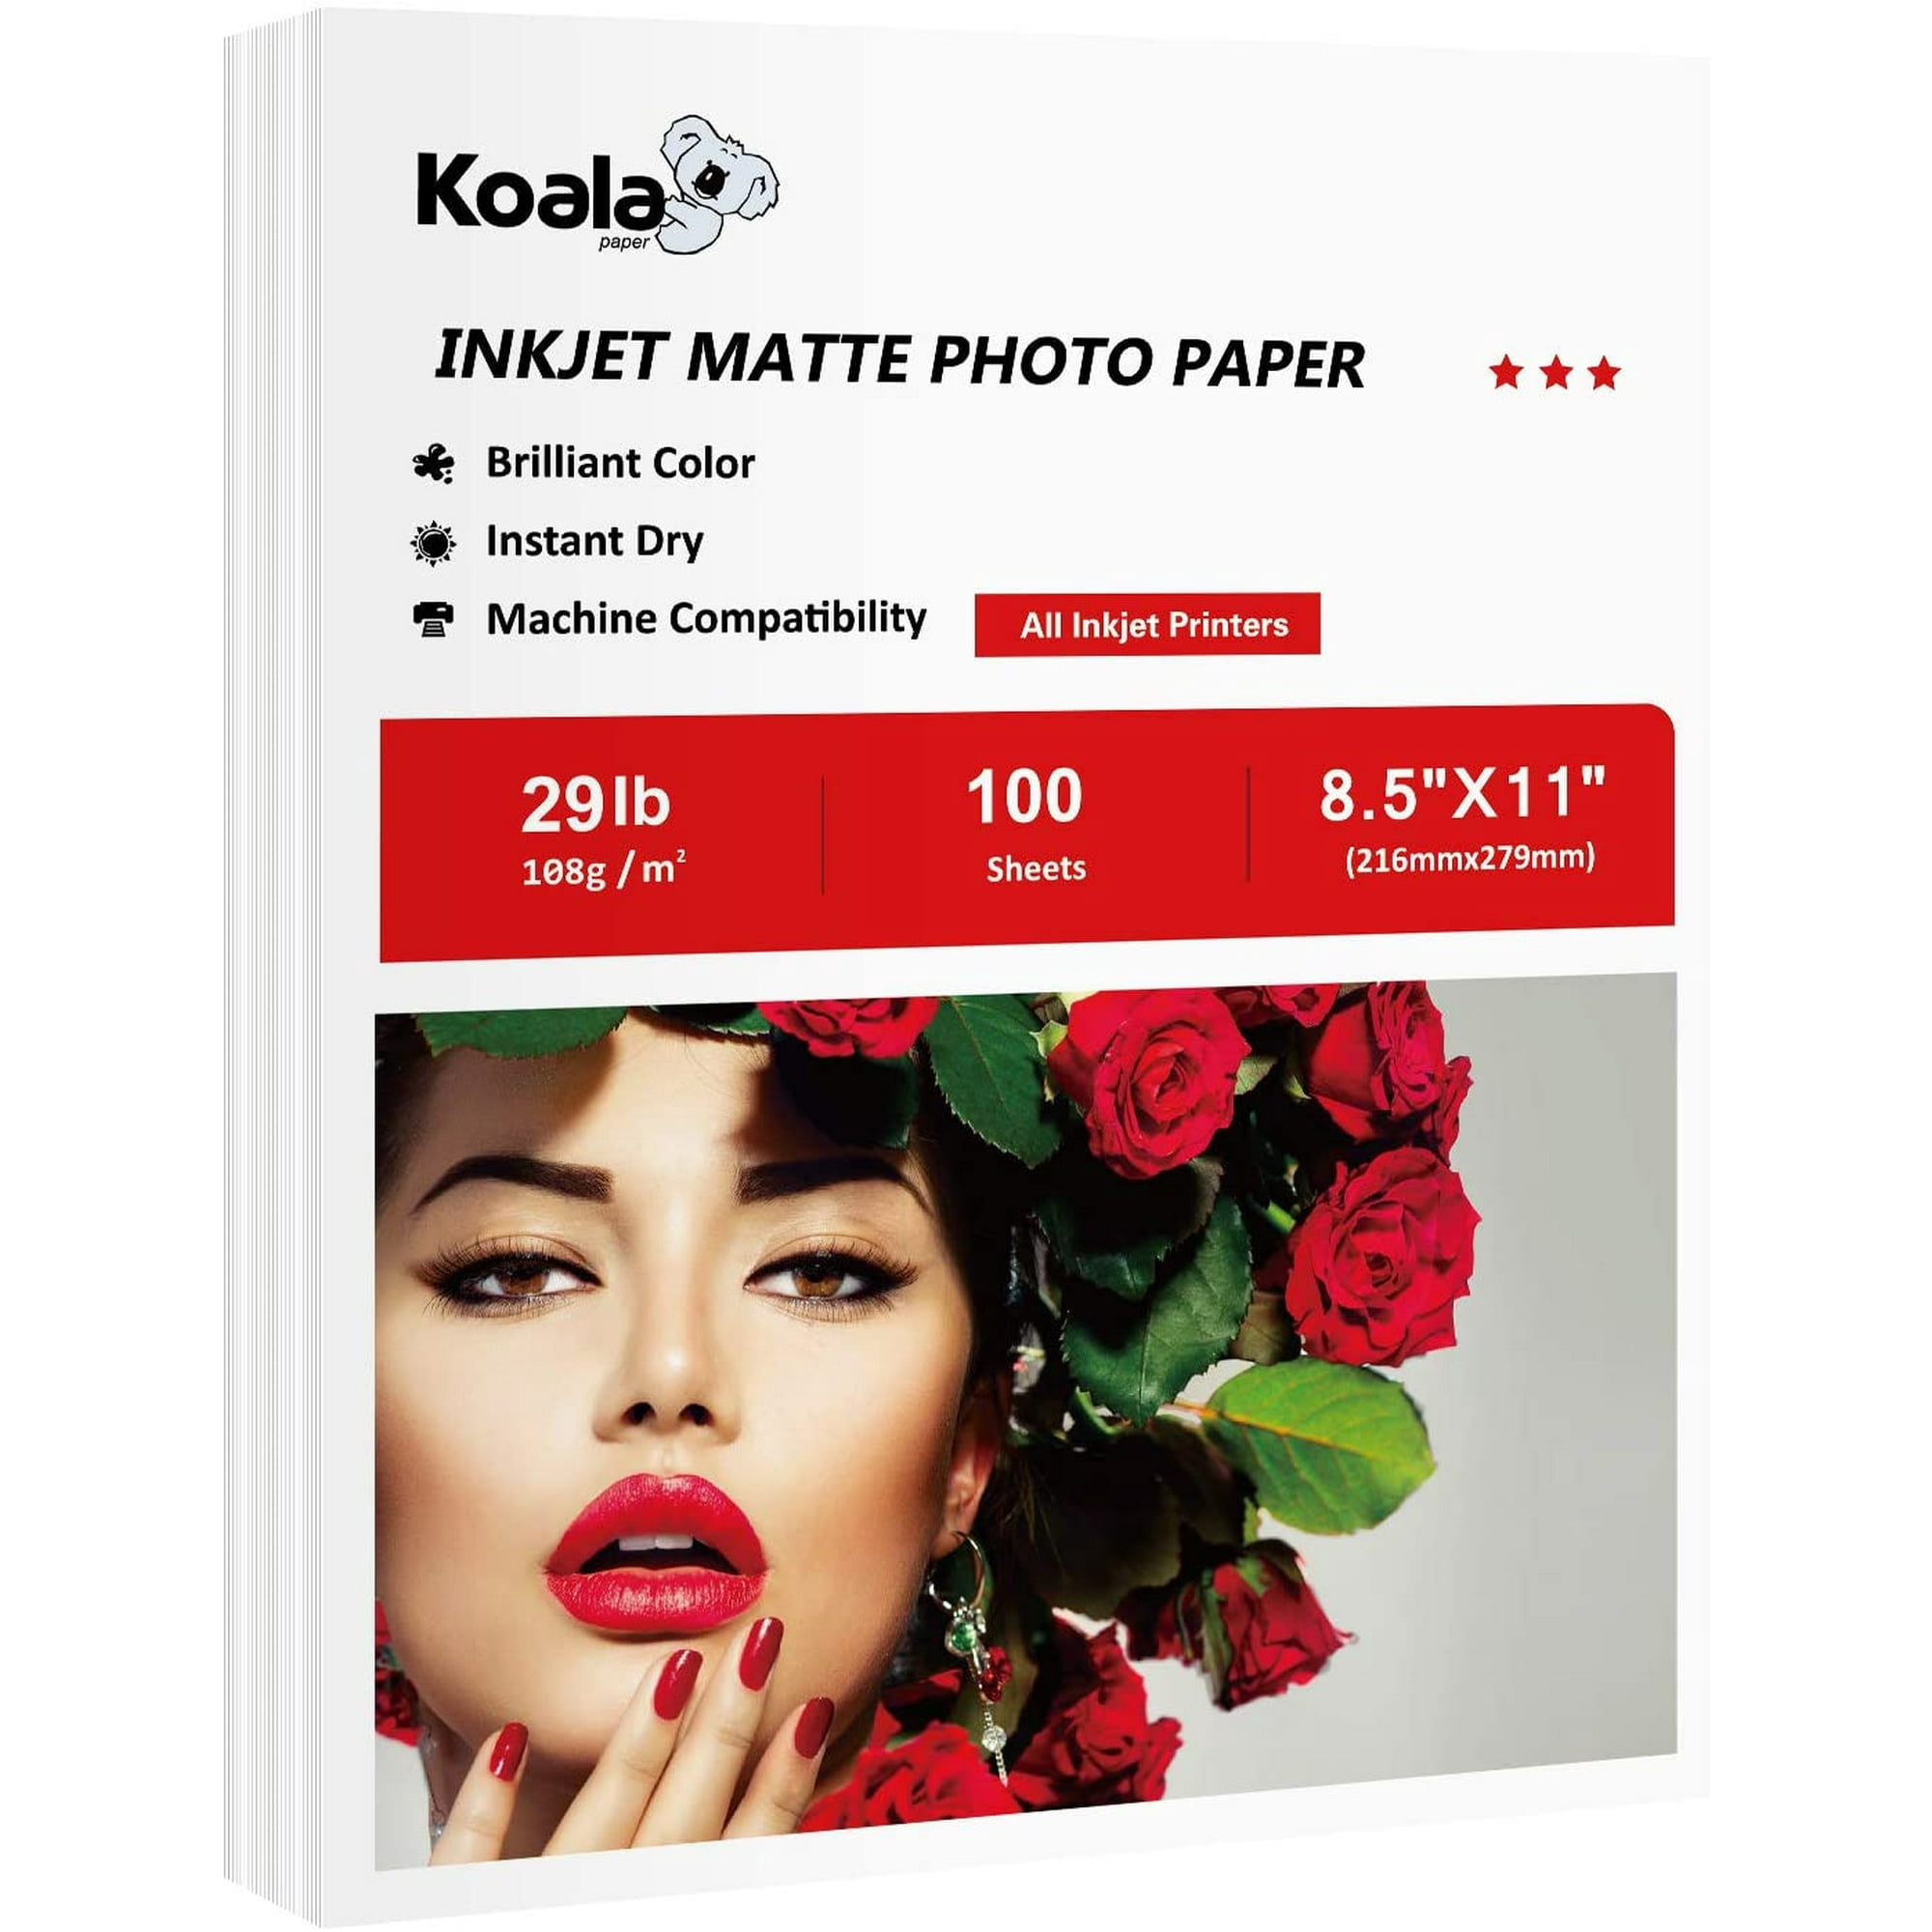 Koala Premium Photo Paper 8.5x11 Glossy 61lb Heavyweight 230gsm 12mil - Cardstock Photo Paper for Inkjet Printers Epson Canon HP Scratch Resistant